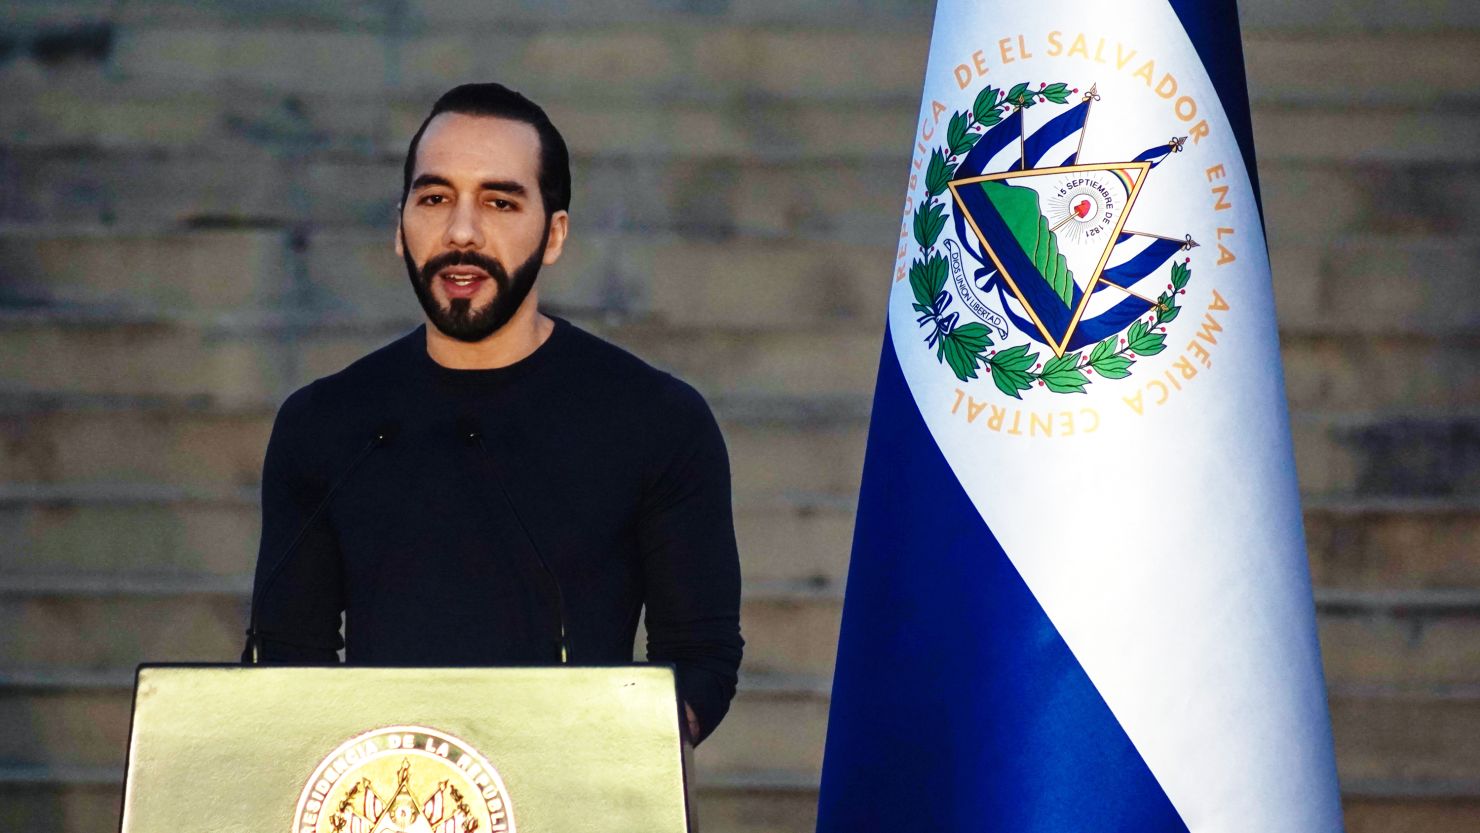 In El Salvador, self-proclaimed 'world's coolest dictator' Nayib Bukele heads for re-election amid human rights concerns |  cnn